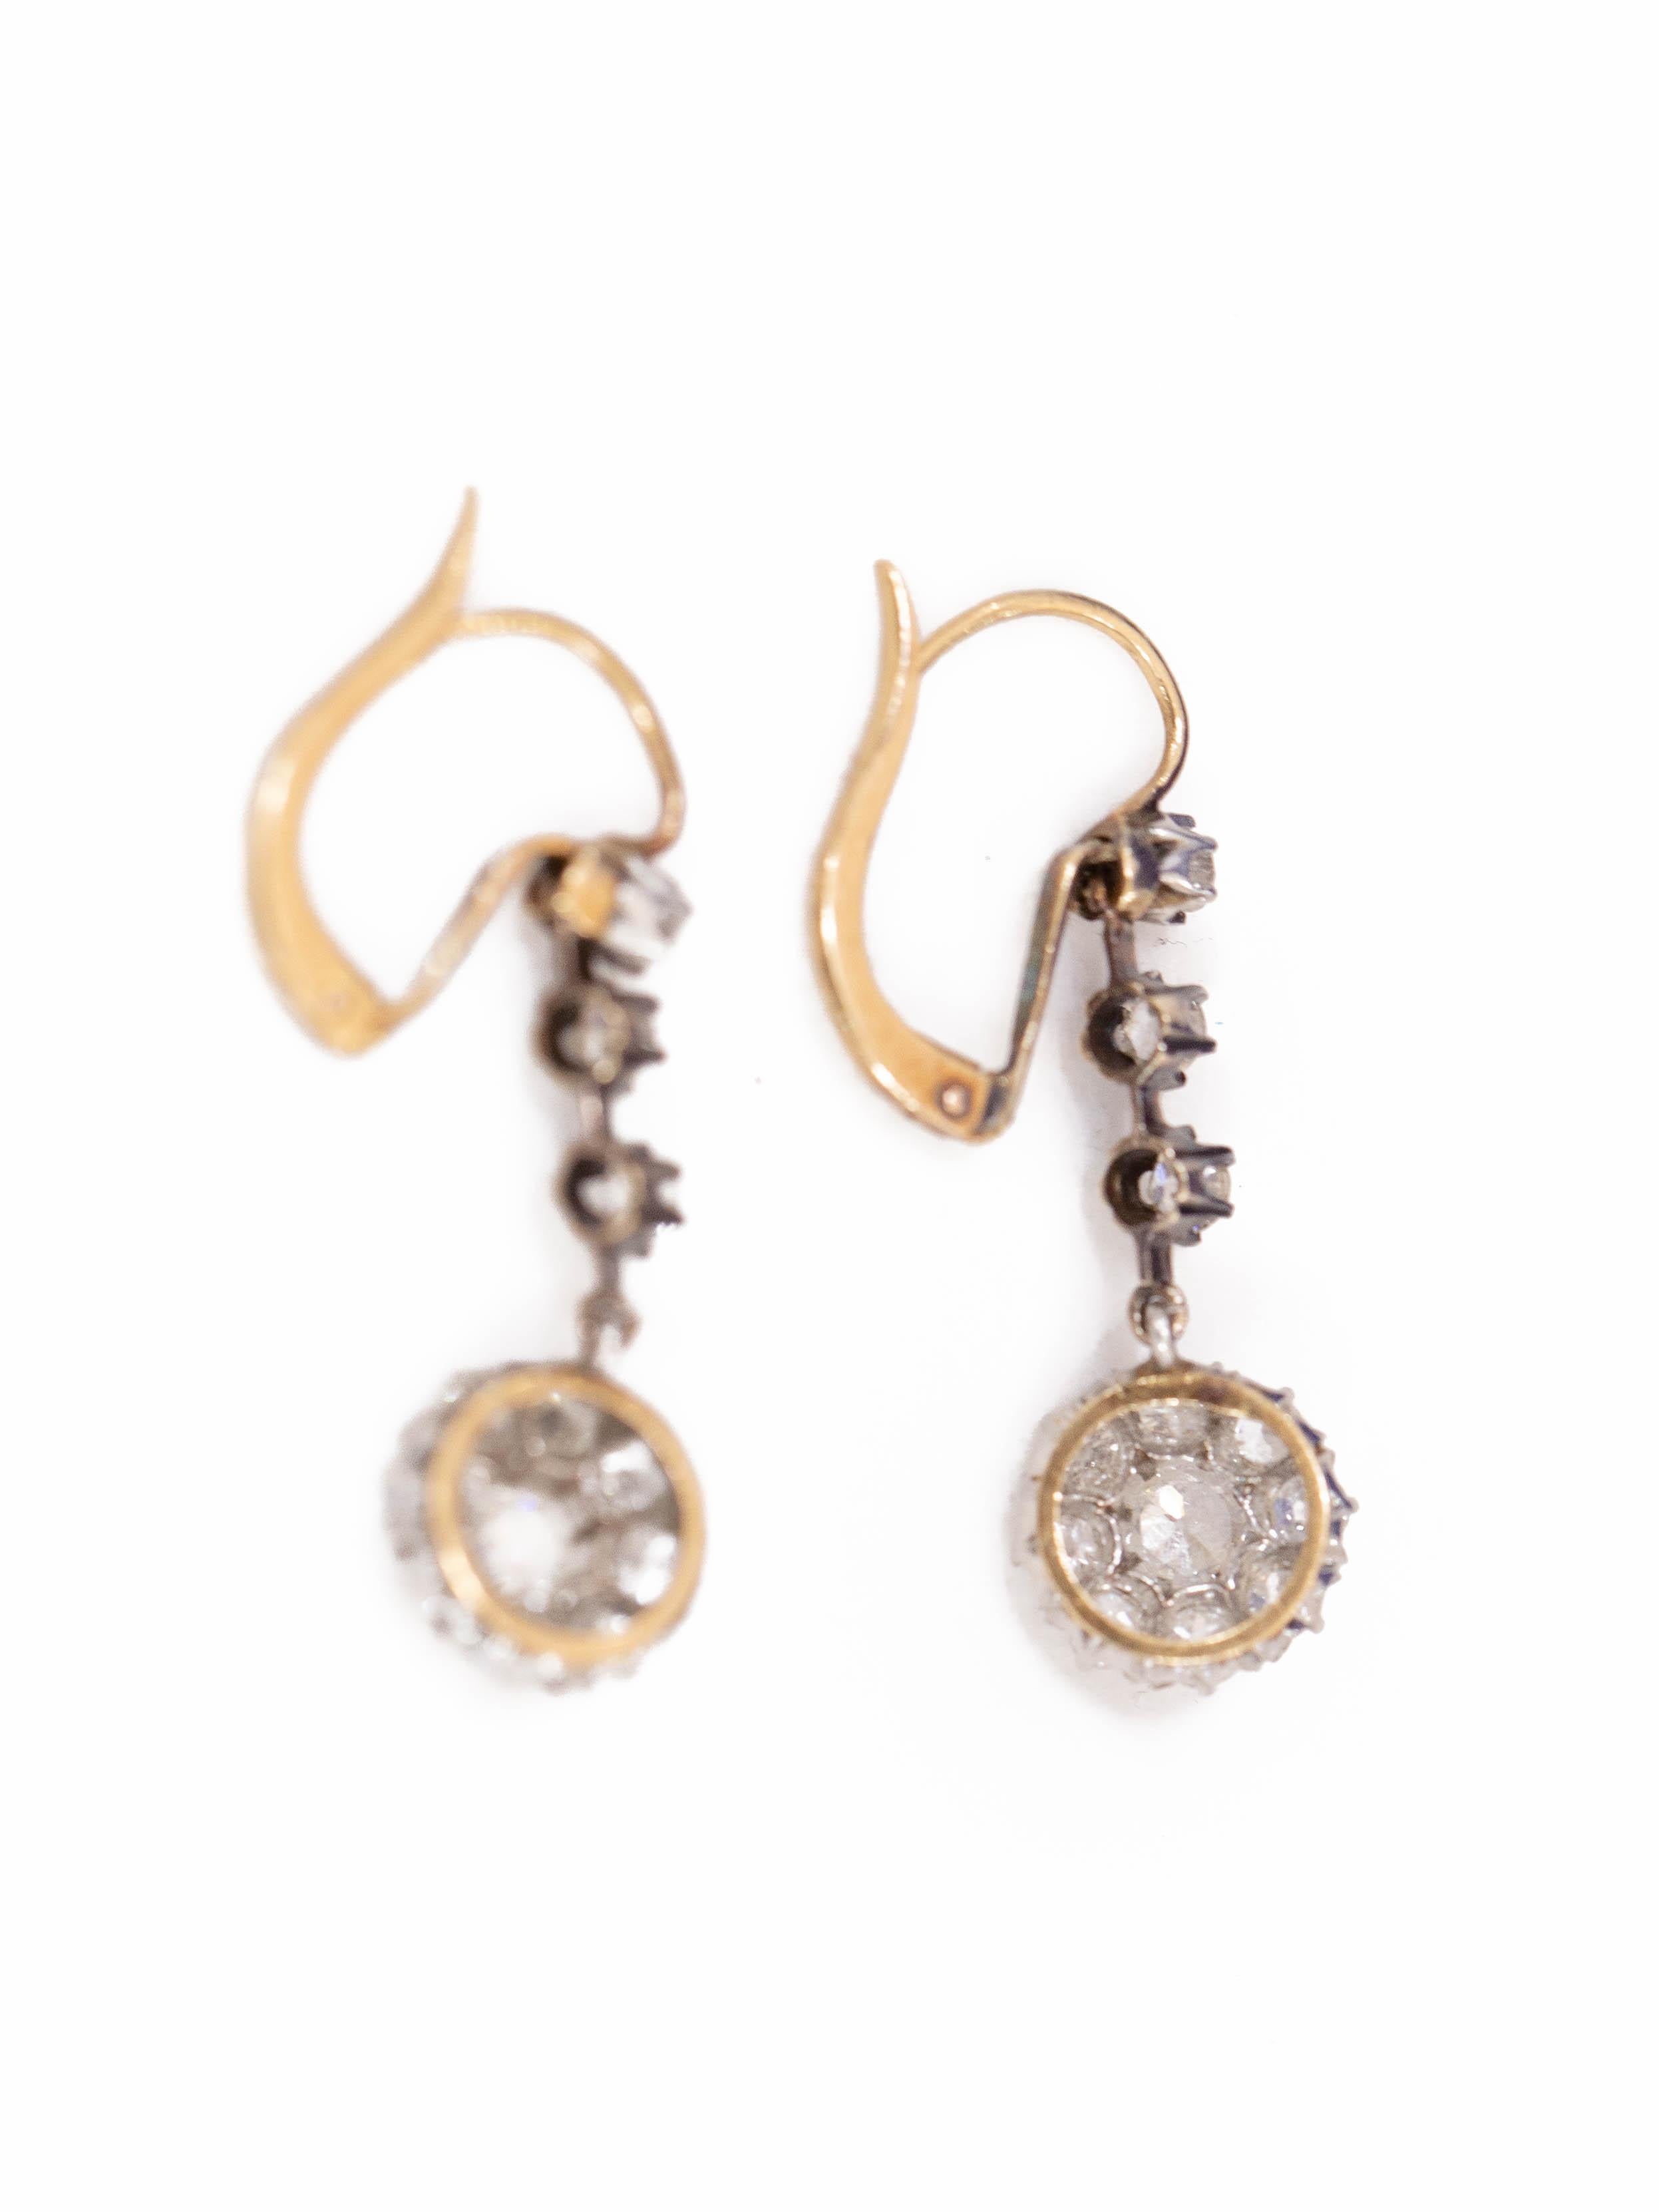 Pair of English Victorian Diamond Earrings in Silver on Gold Setting, circa 1880 1